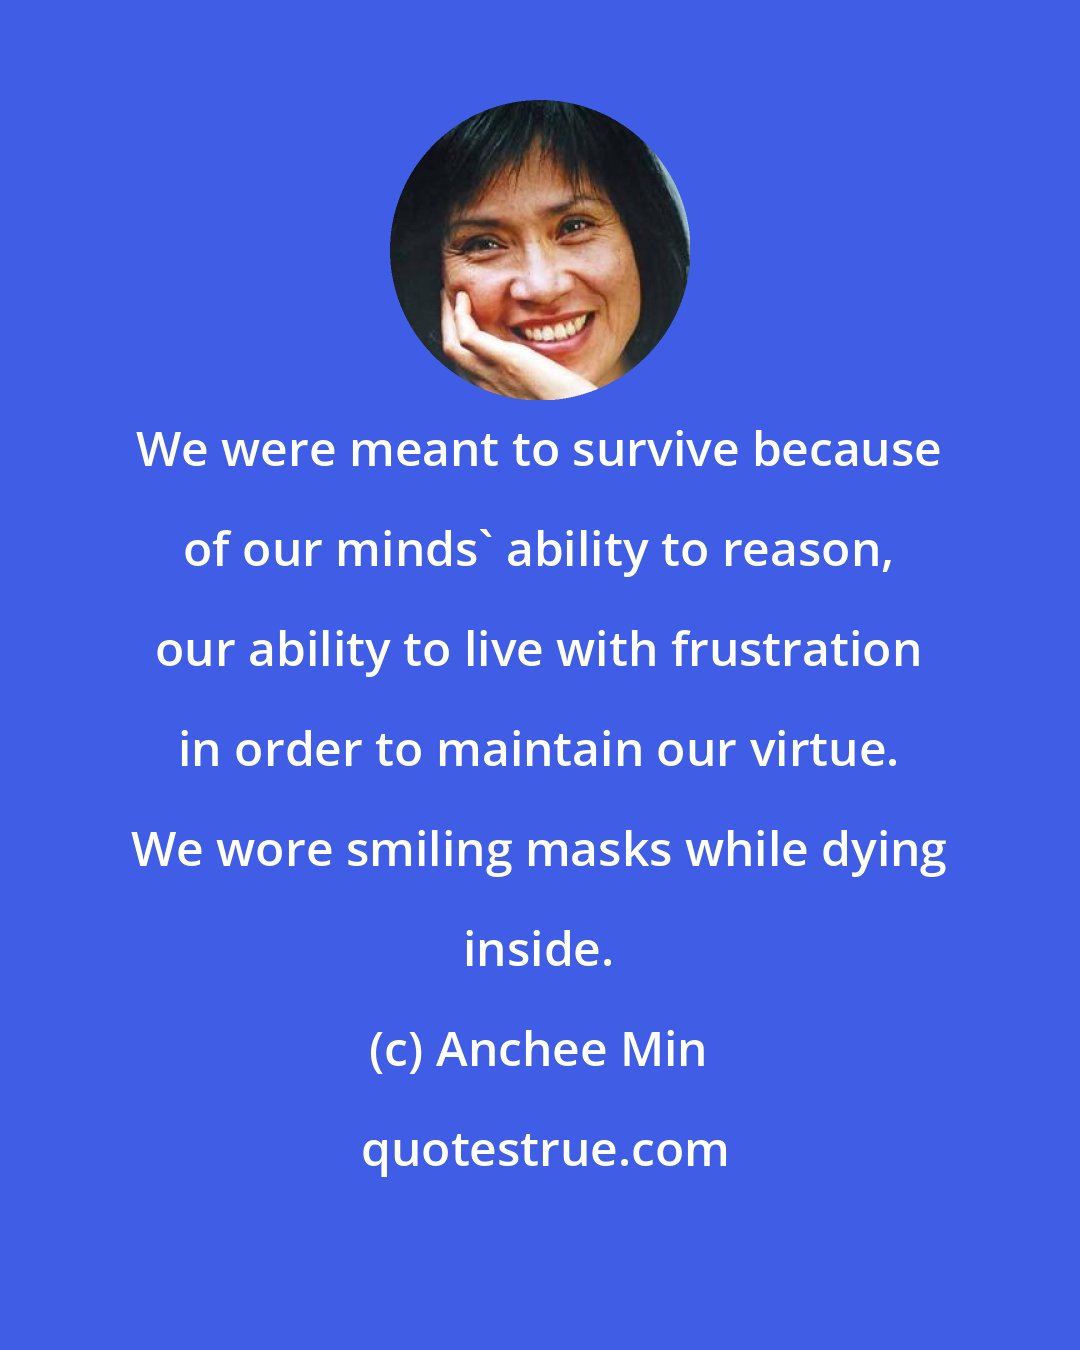 Anchee Min: We were meant to survive because of our minds' ability to reason, our ability to live with frustration in order to maintain our virtue. We wore smiling masks while dying inside.